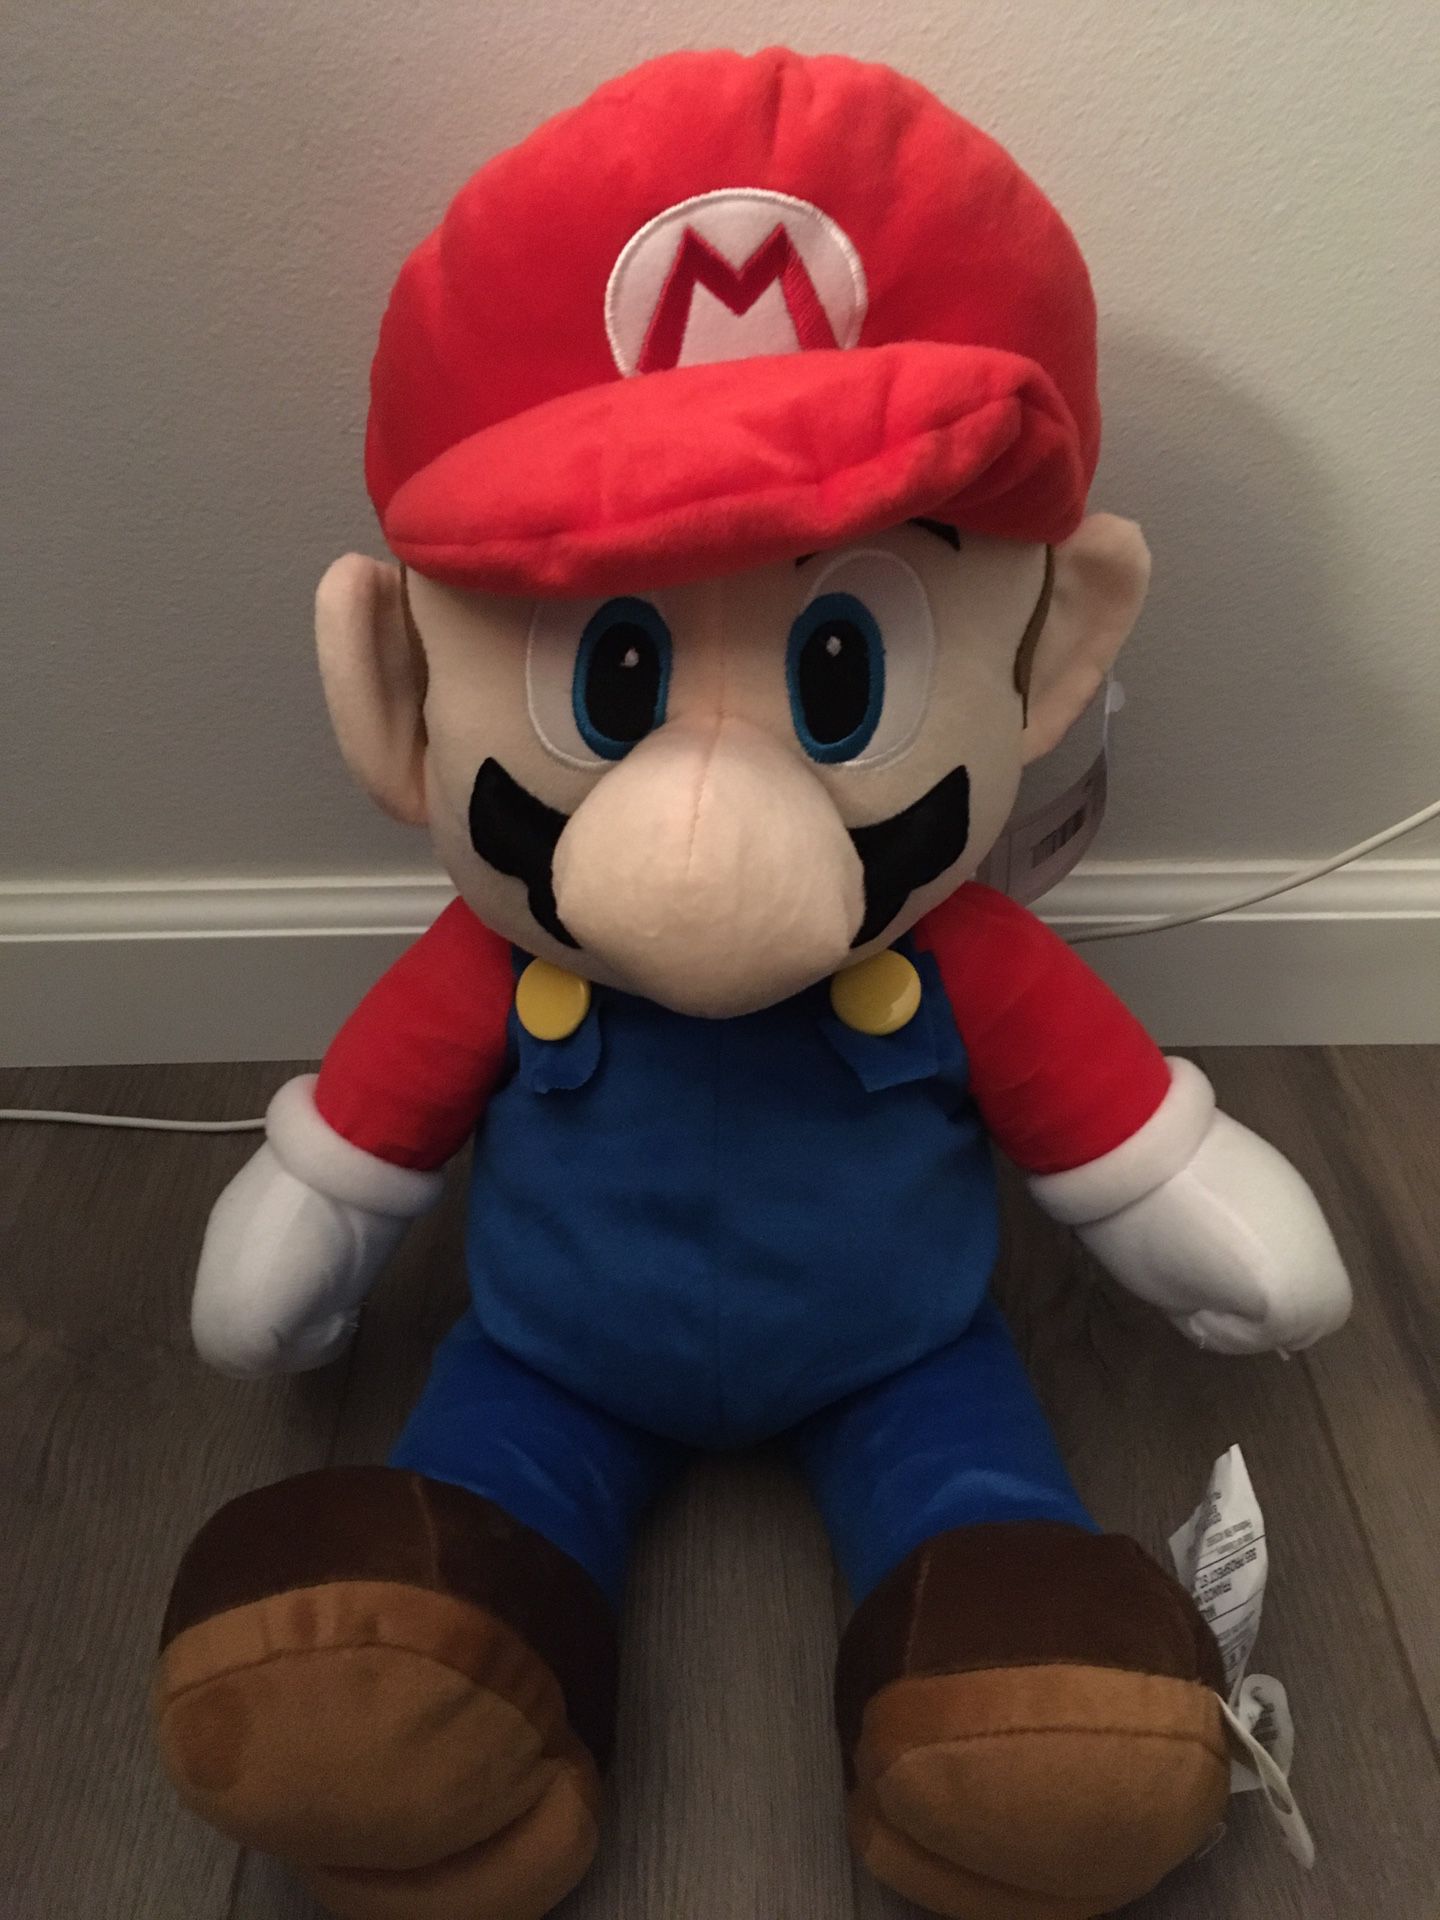 Nintendo Switch Super Mario Pillow Plush 22 Inches almost 2 feet tall